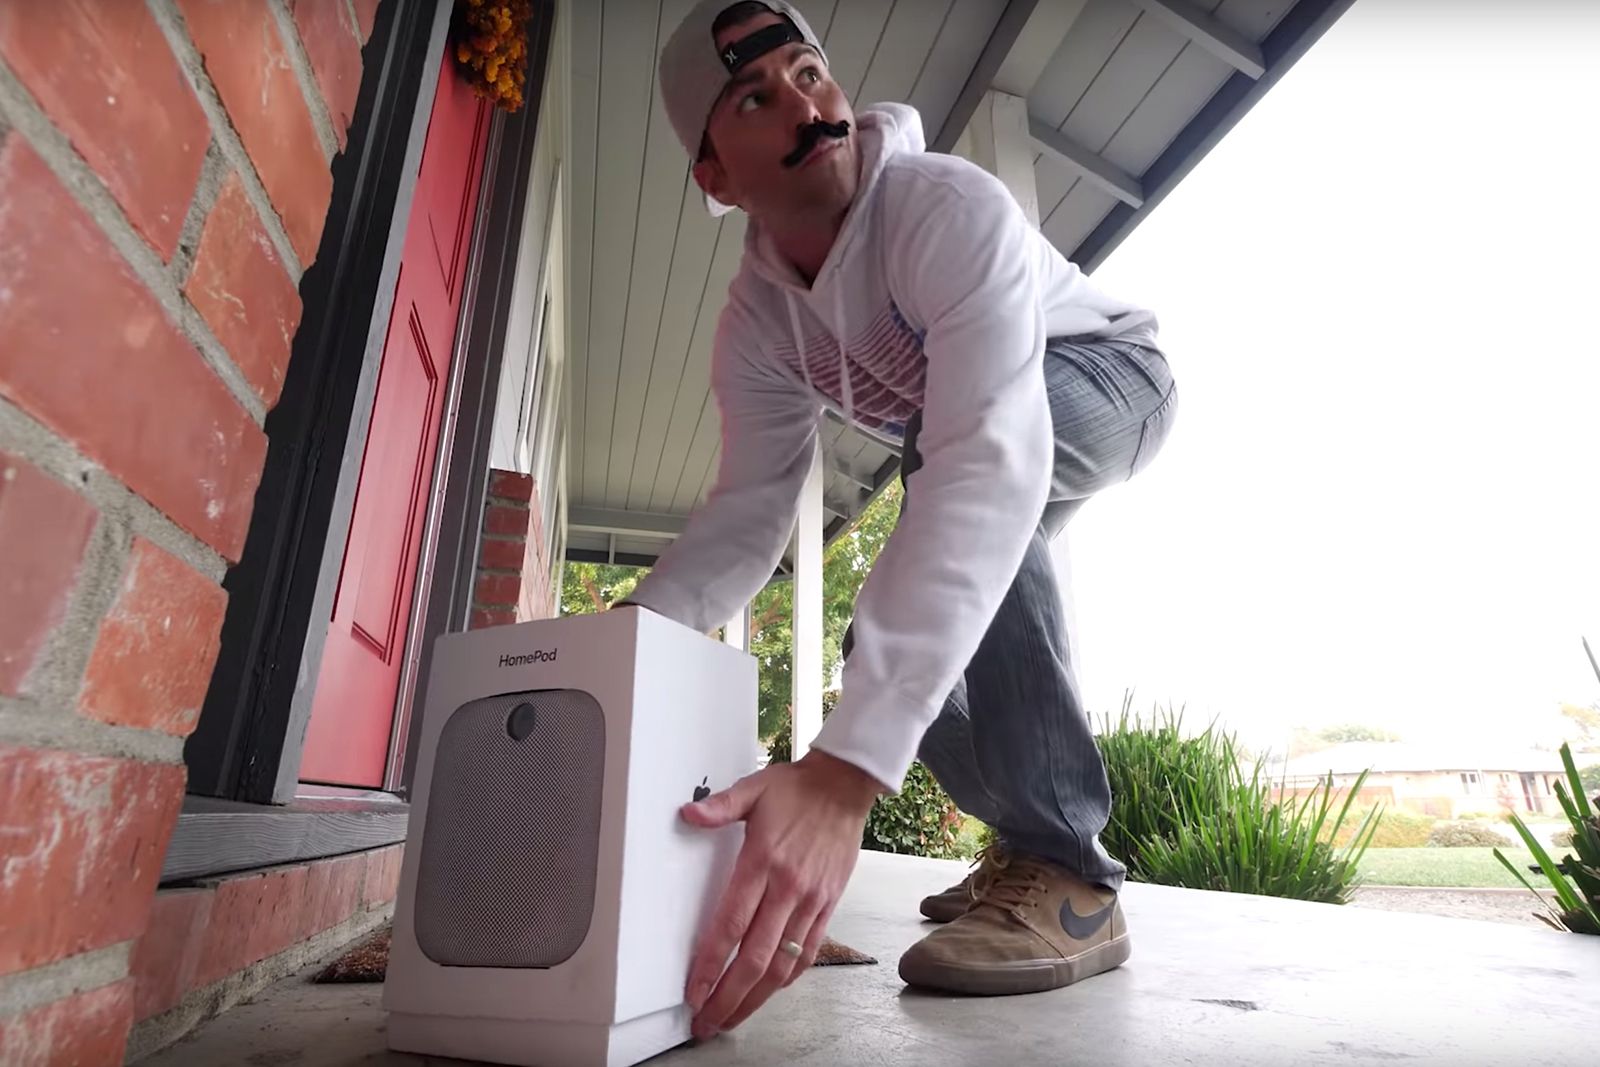 YouTuber designs a parcel that shoots glitter fart smells at porch thieves image 1